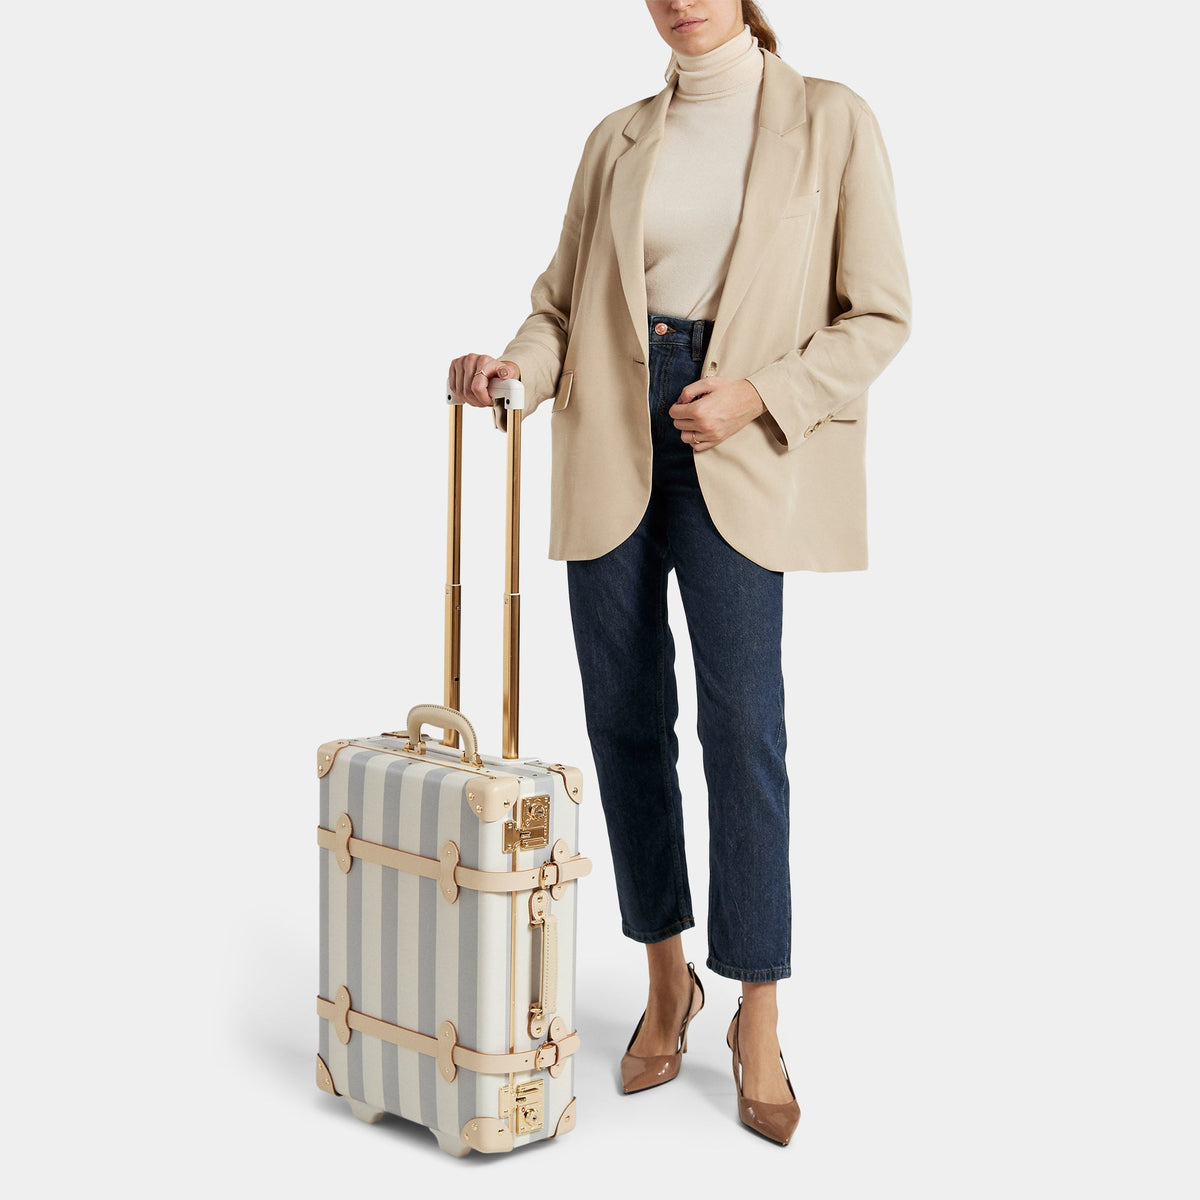 SteamLine Luggage's Founder, Sara Banks: How Our Founder Got Rolling –  Steamline Luggage